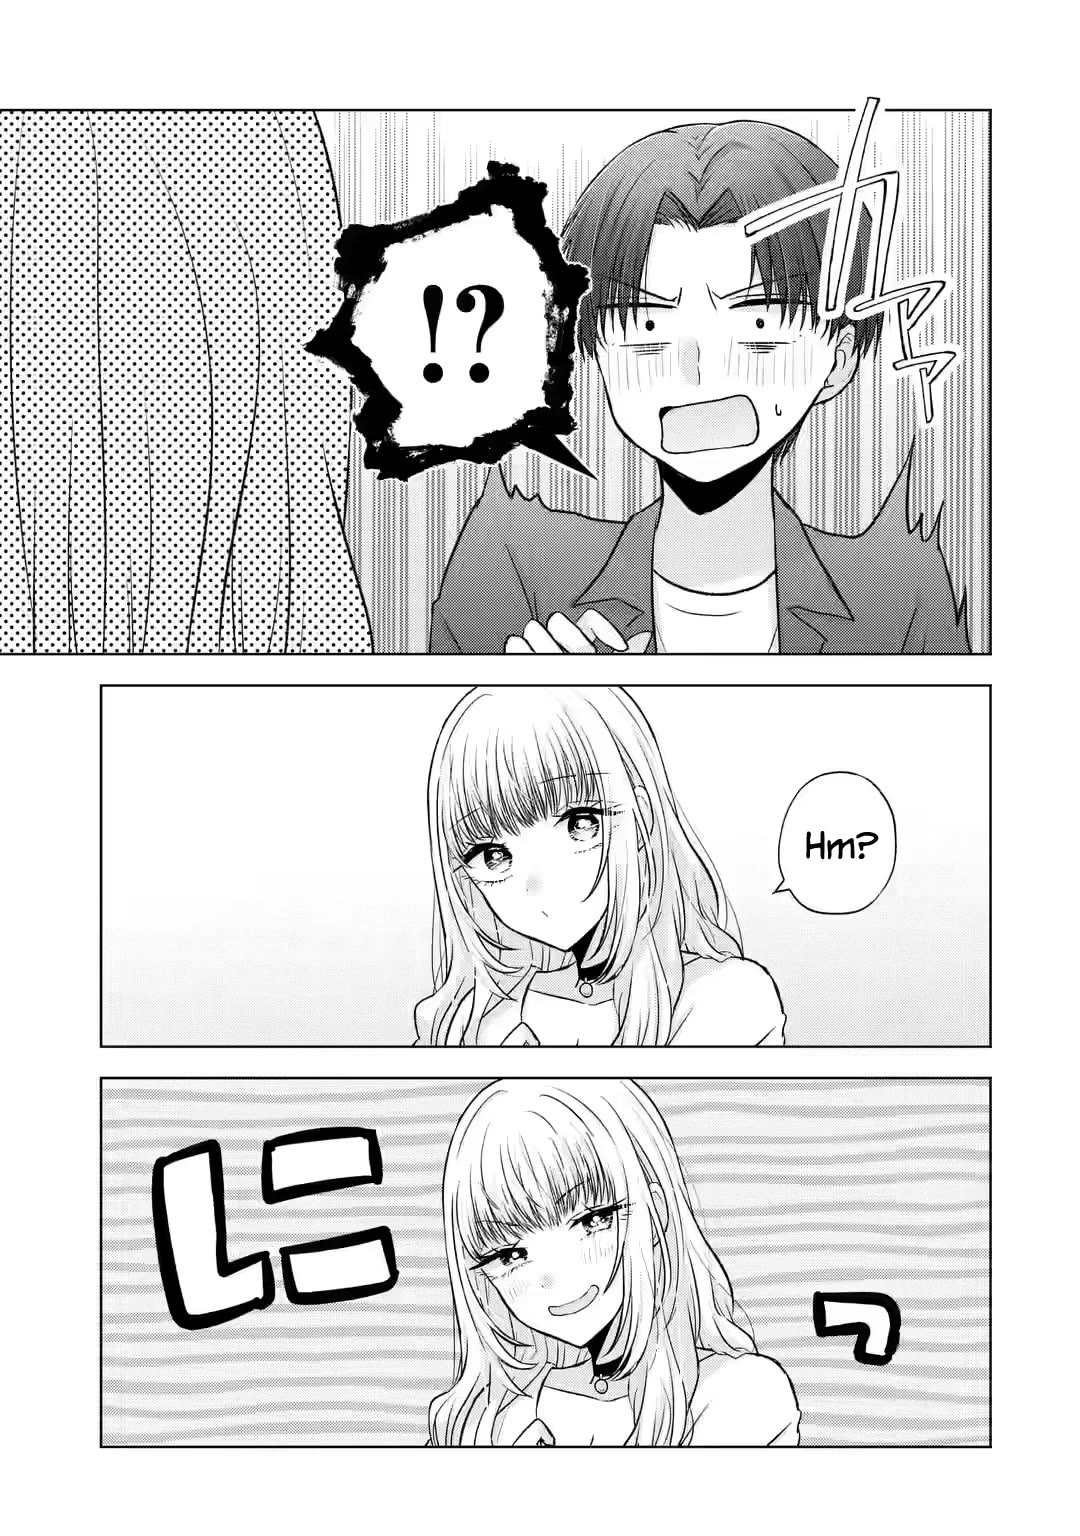 Nanjou-san Wants to Be Held by Me - chapter 3 - #5